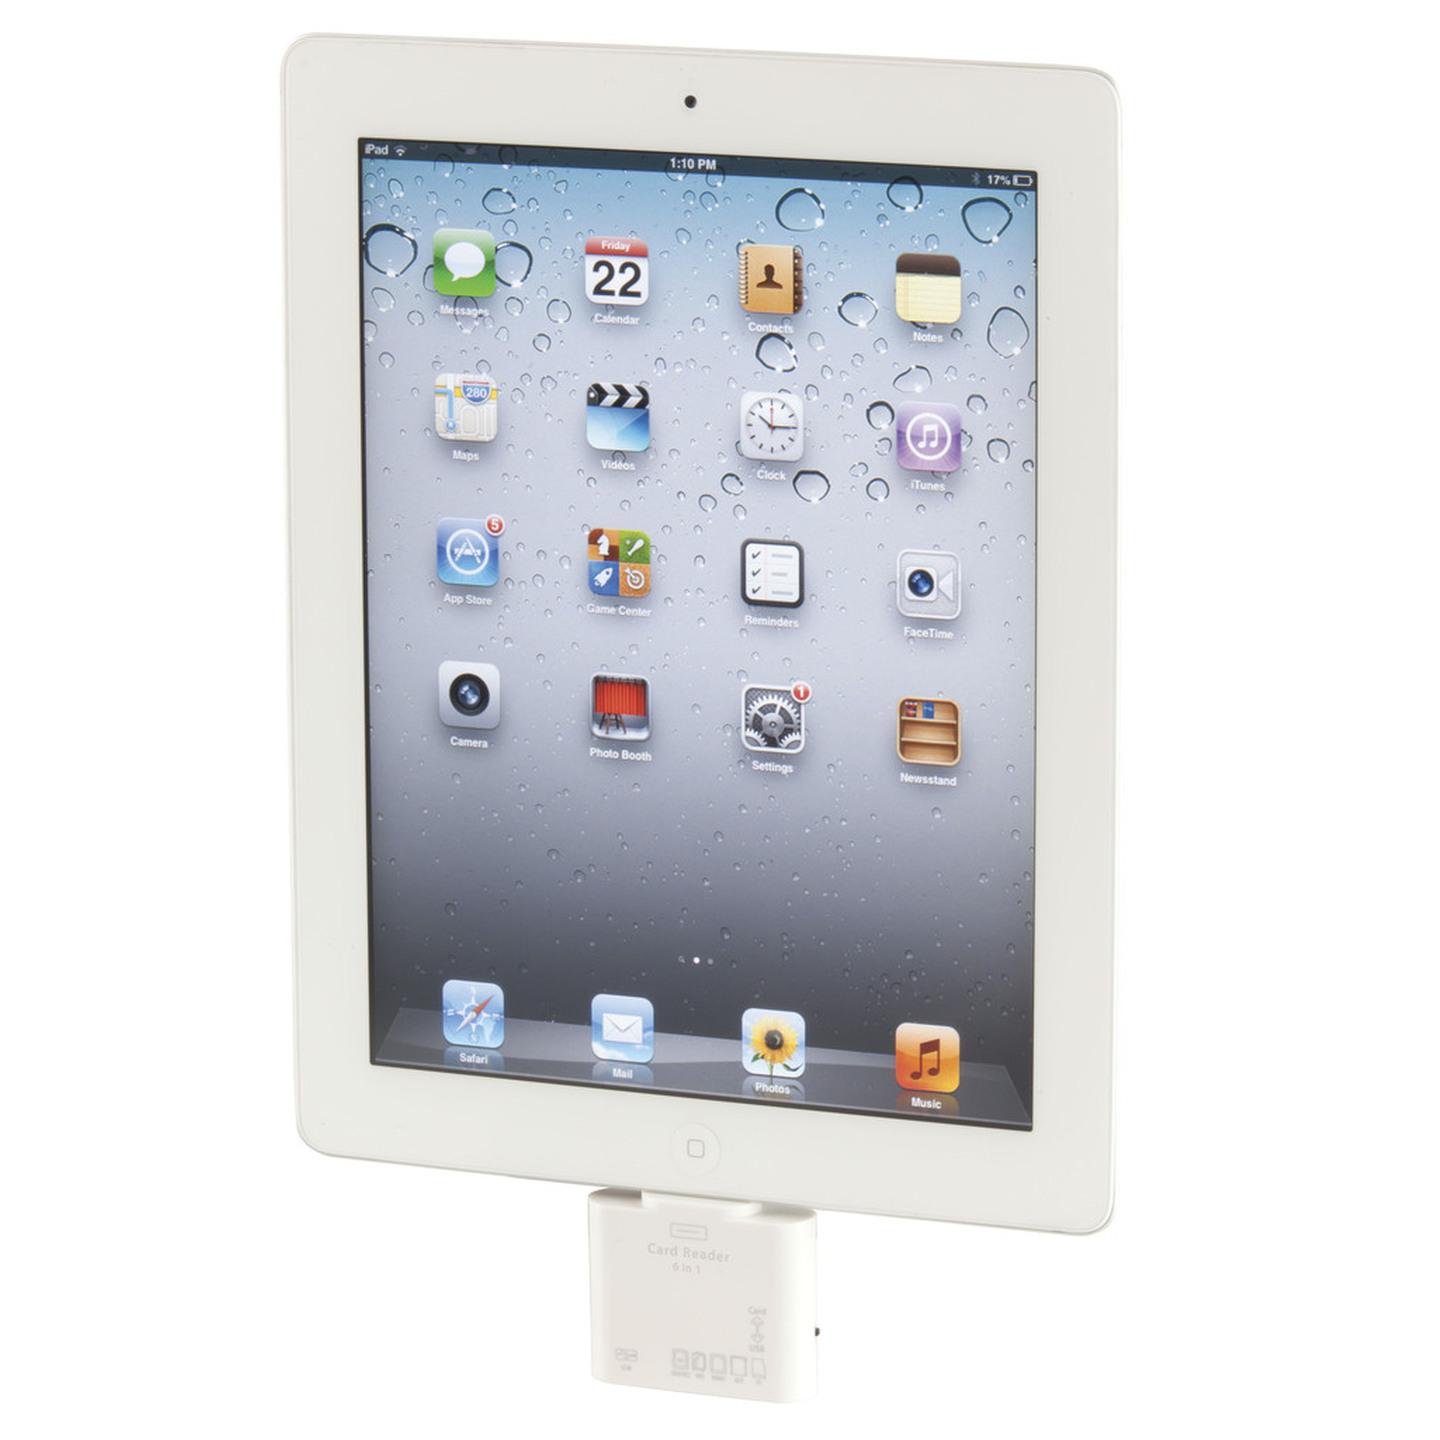 6-in-1 Card Reader for iPad 1/2/3